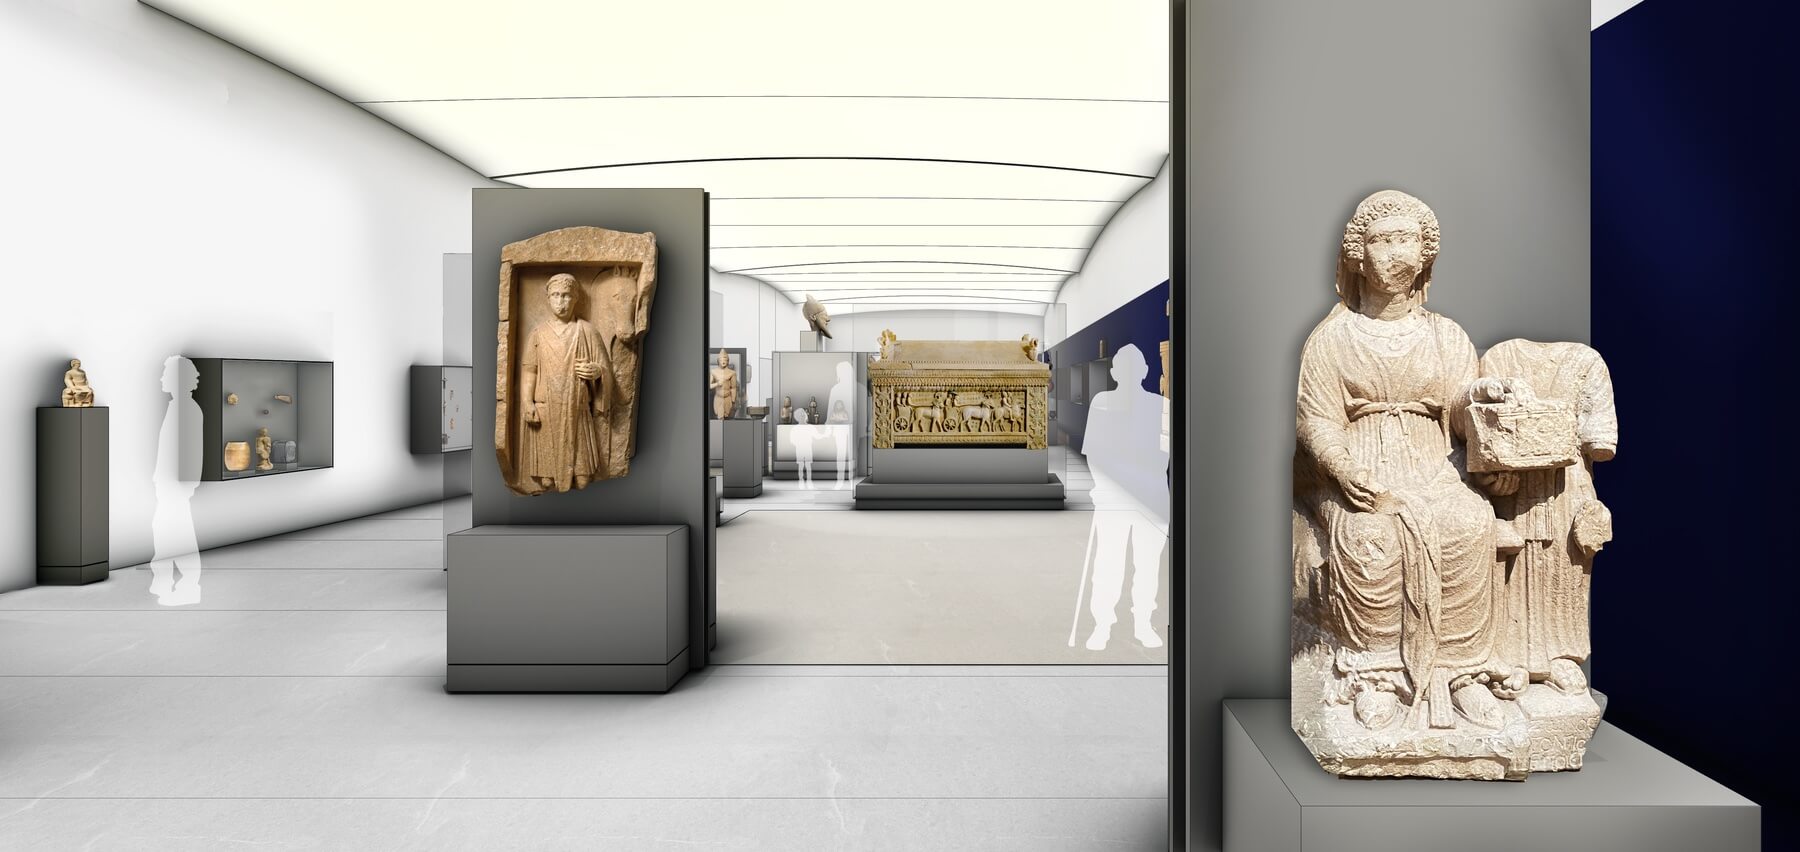 rendering of ancient art on display in a museum gallery